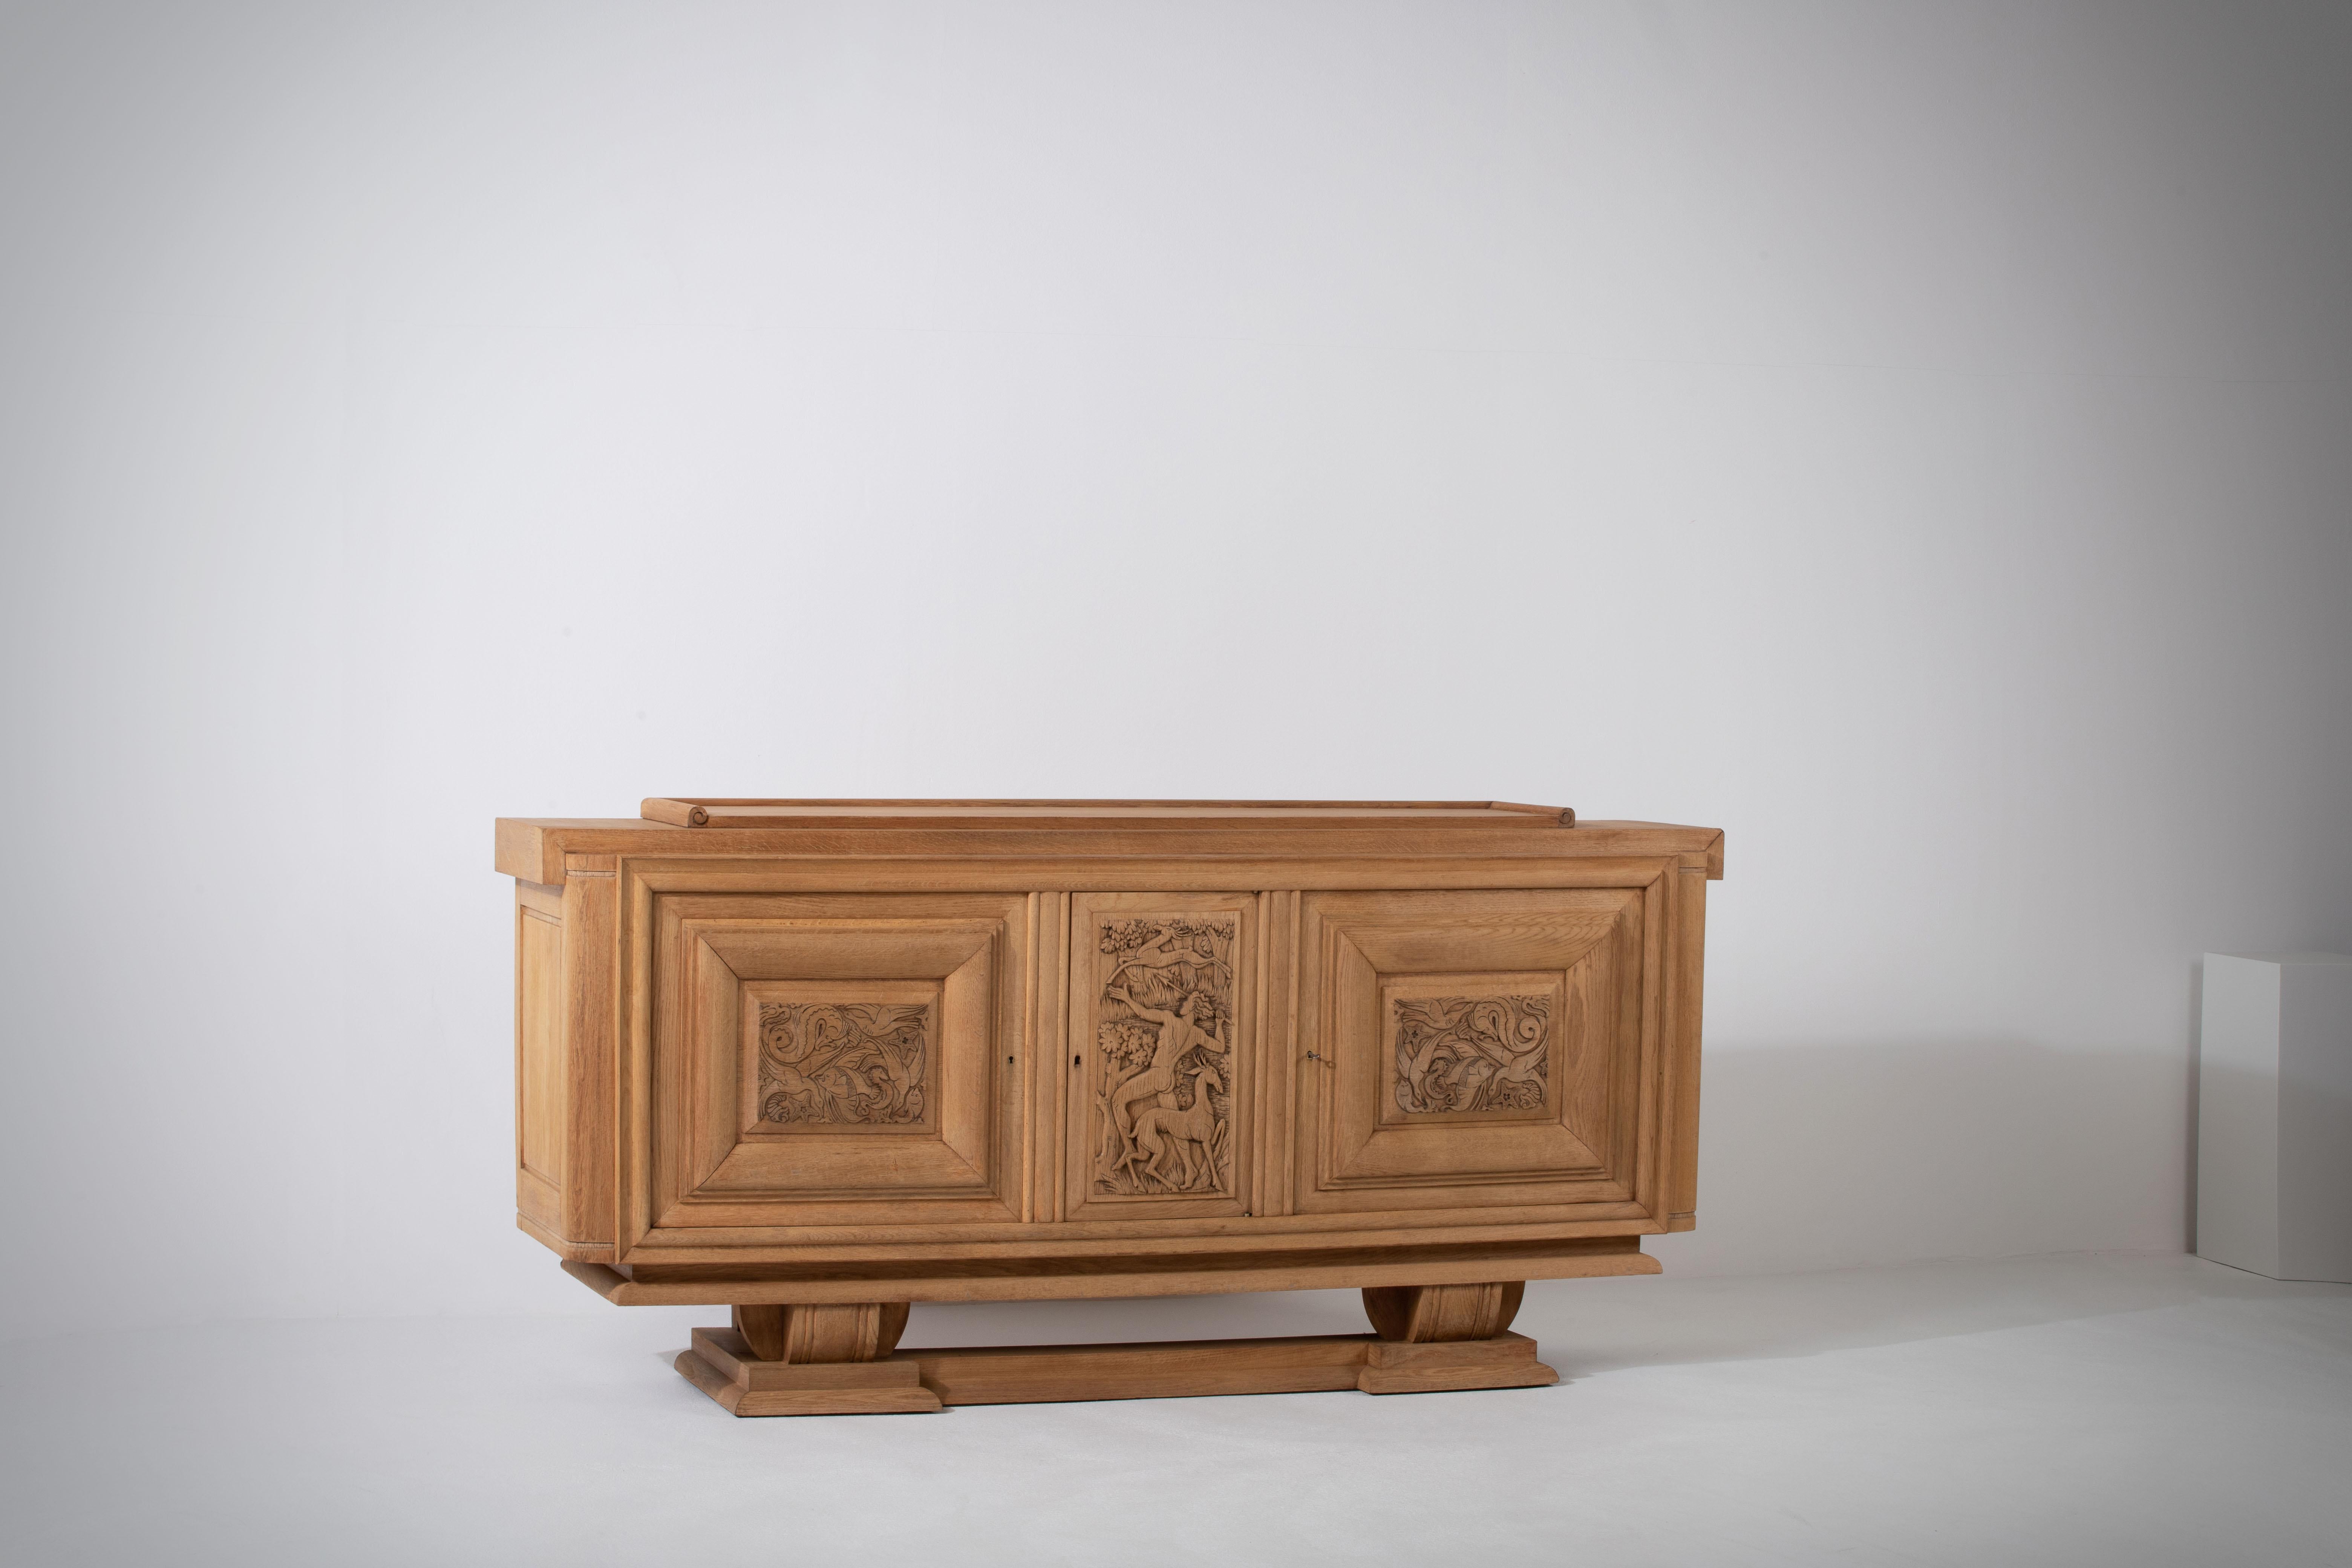 Introducing a remarkable 1940s Art Deco buffet, adorned with a captivating hunting scene meticulously hand carved on its doors. This exquisite piece showcases the fusion of artistry and functionality, creating a truly unique and visually stunning